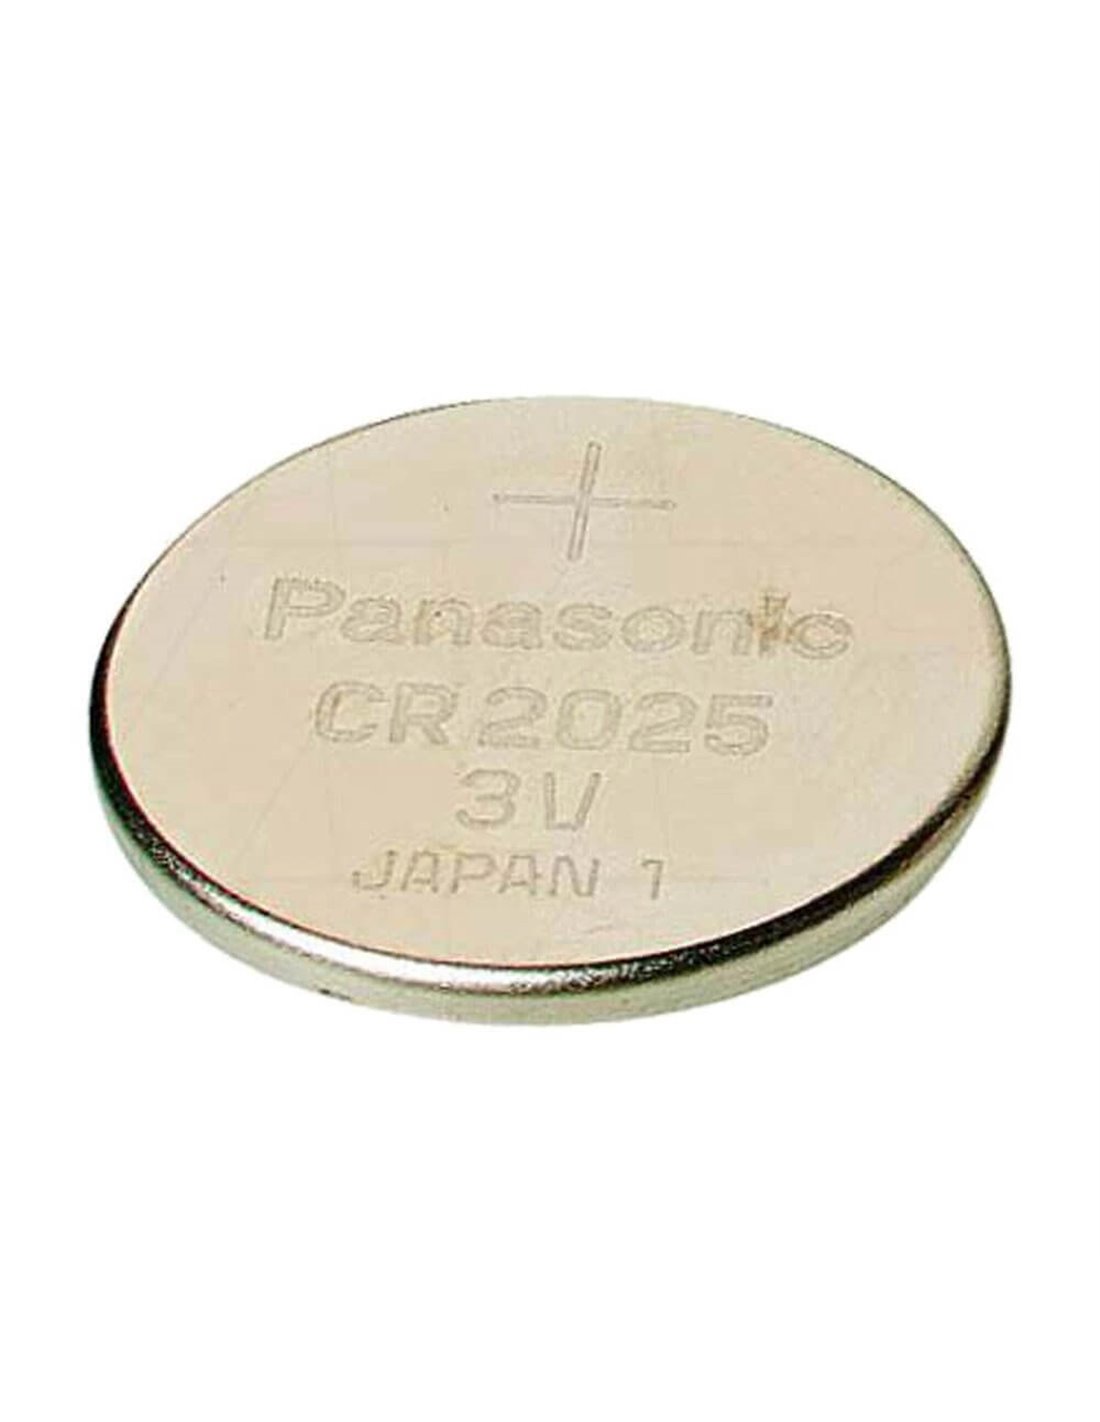 CR2025 3 Volt Lithium Battery Replacement